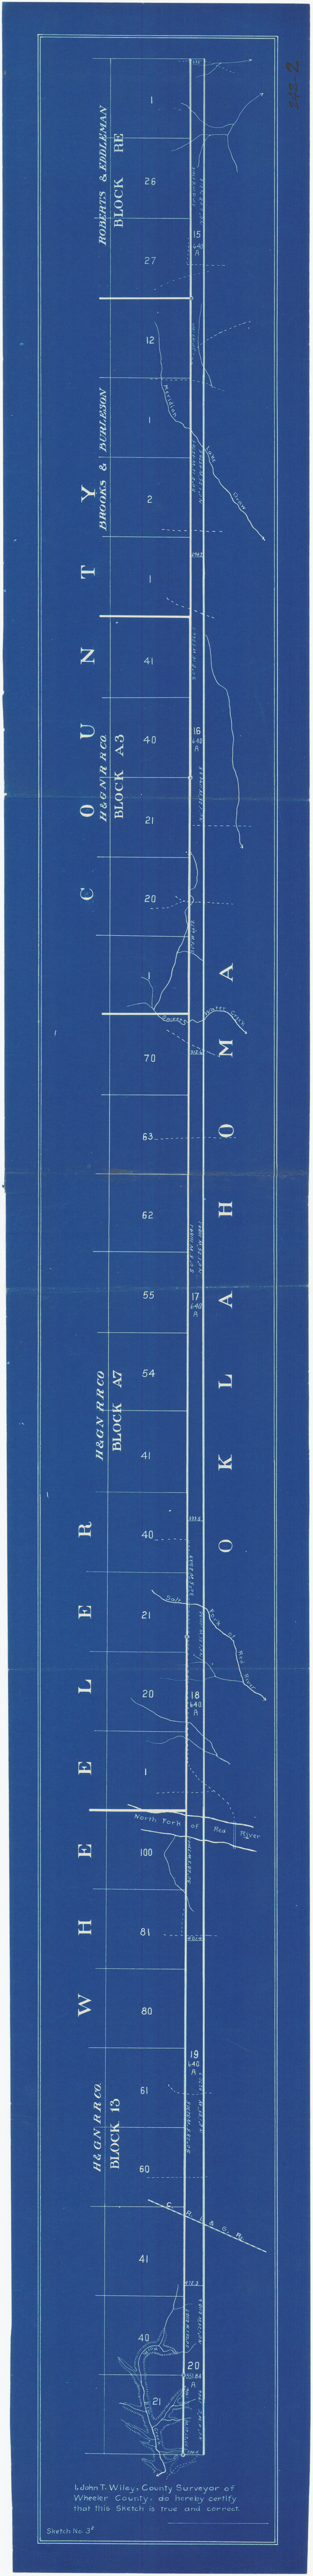 89825, [East line of Wheeler County along Oklahoma], Twichell Survey Records